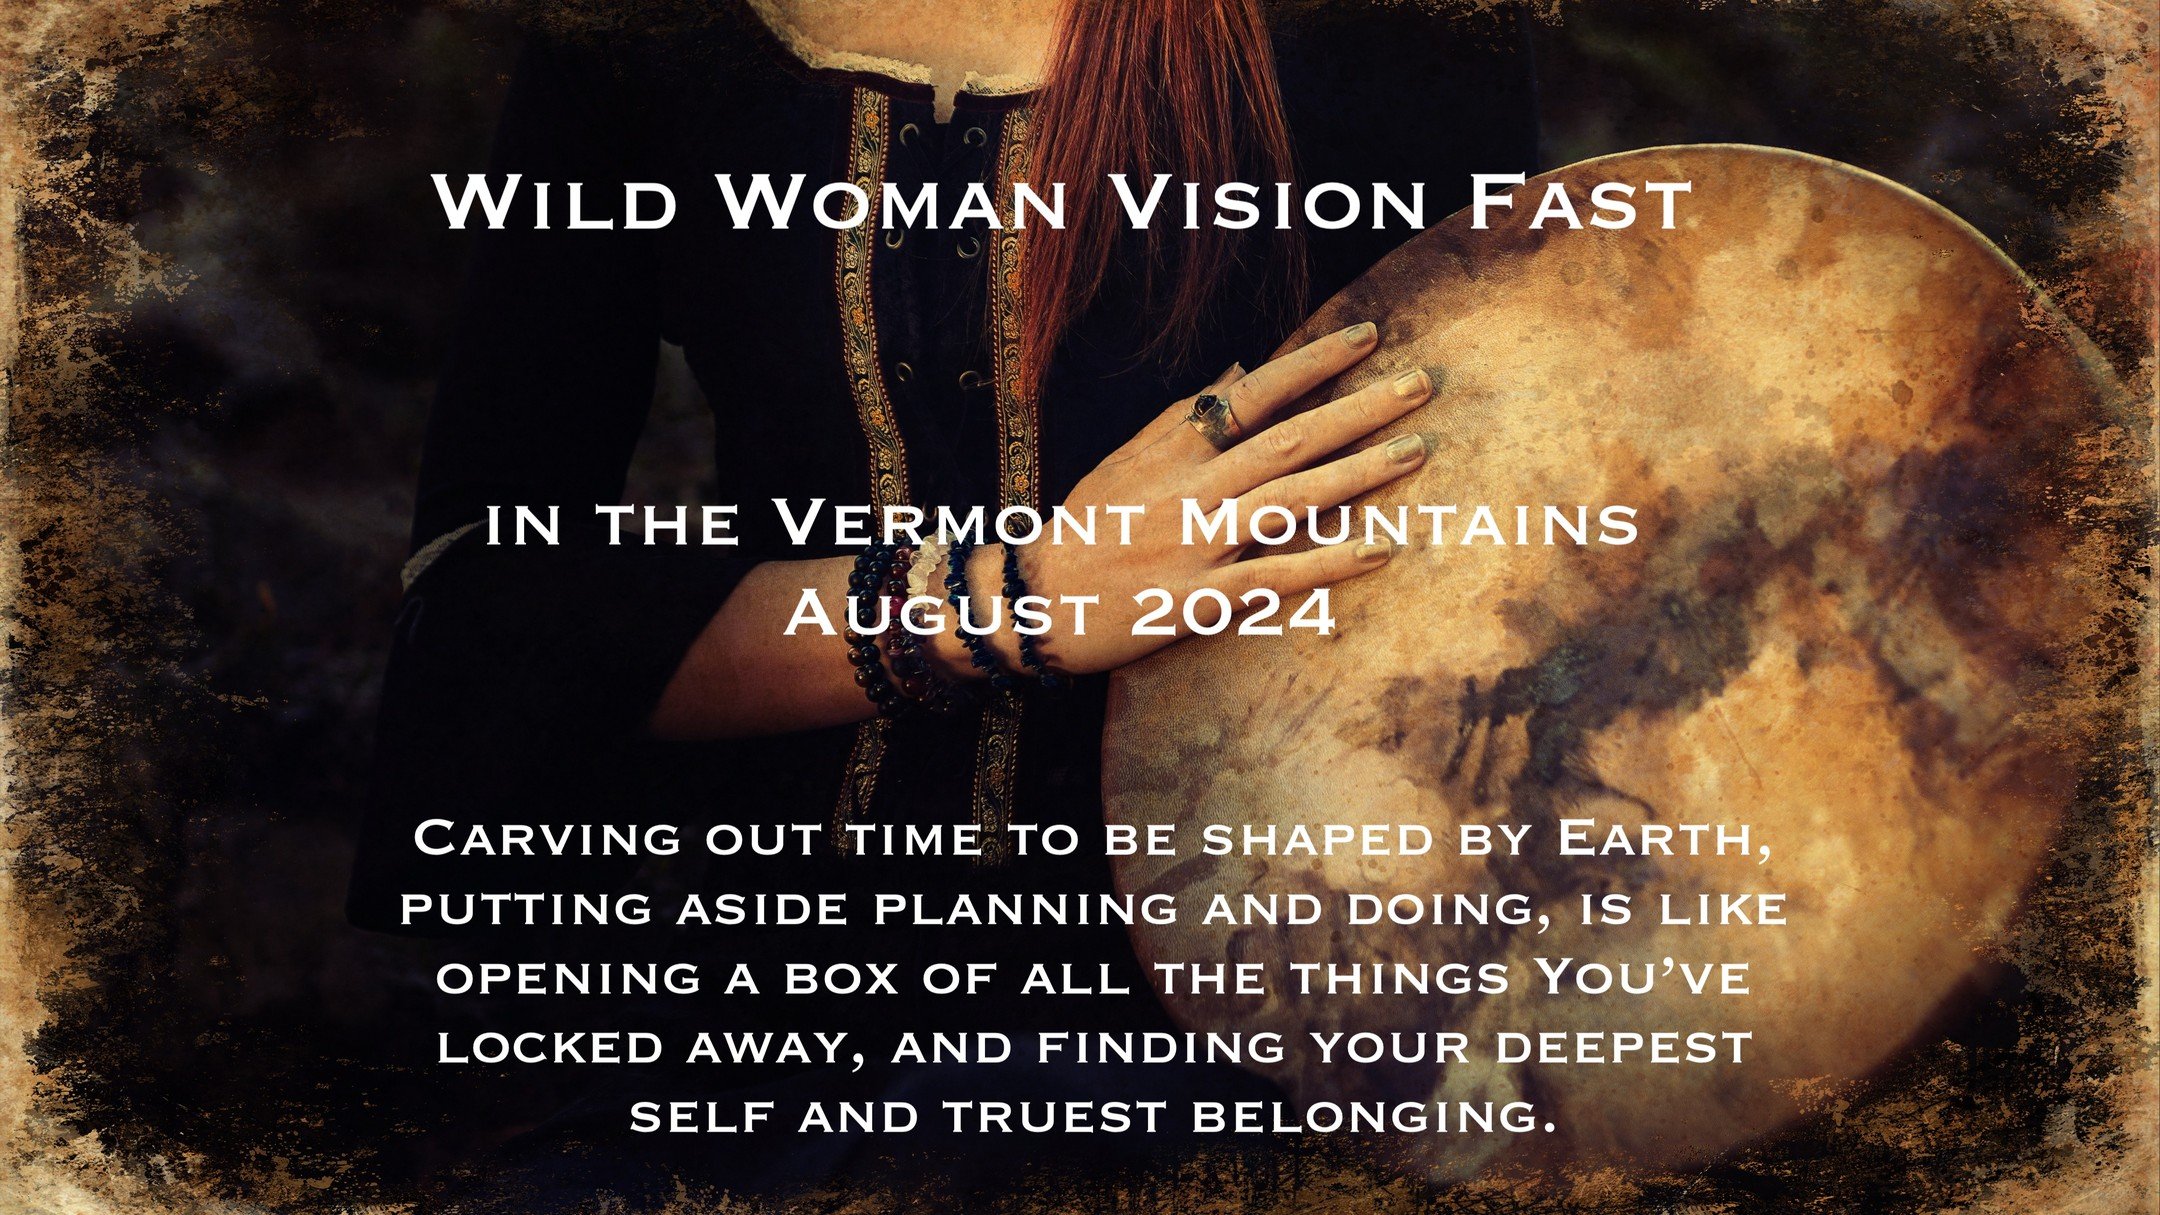 We have spaces for this profoundest of ceremonies--in the Wildlands of Spirit Hollow. Find your deepest belonging.
www.spirithollow.org/offerings/p/wild-woman-vision-fast